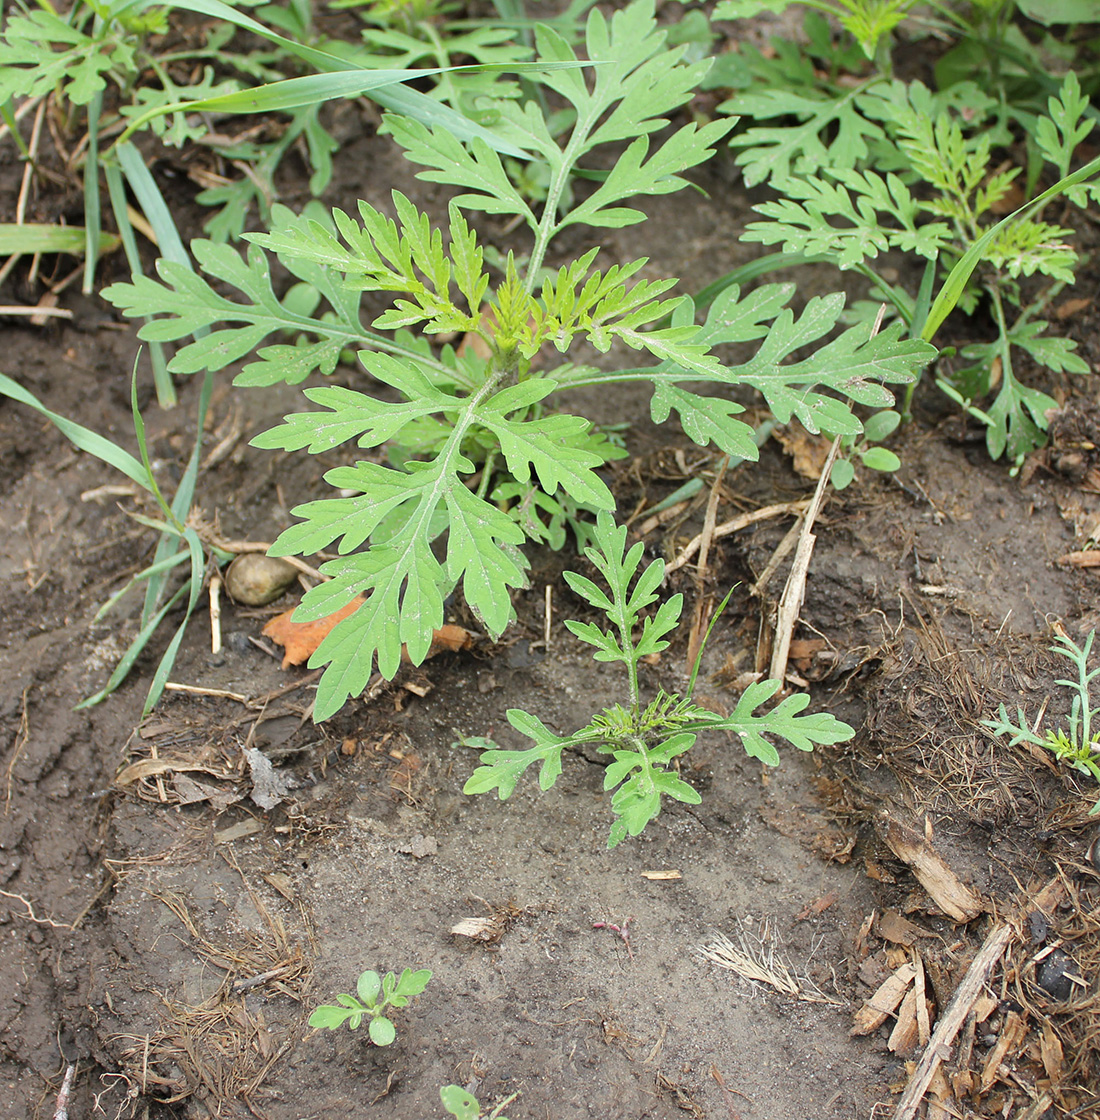 A cluster of common ragweed plants ranging in stages from 2 to 6 nodes (12 leaves)